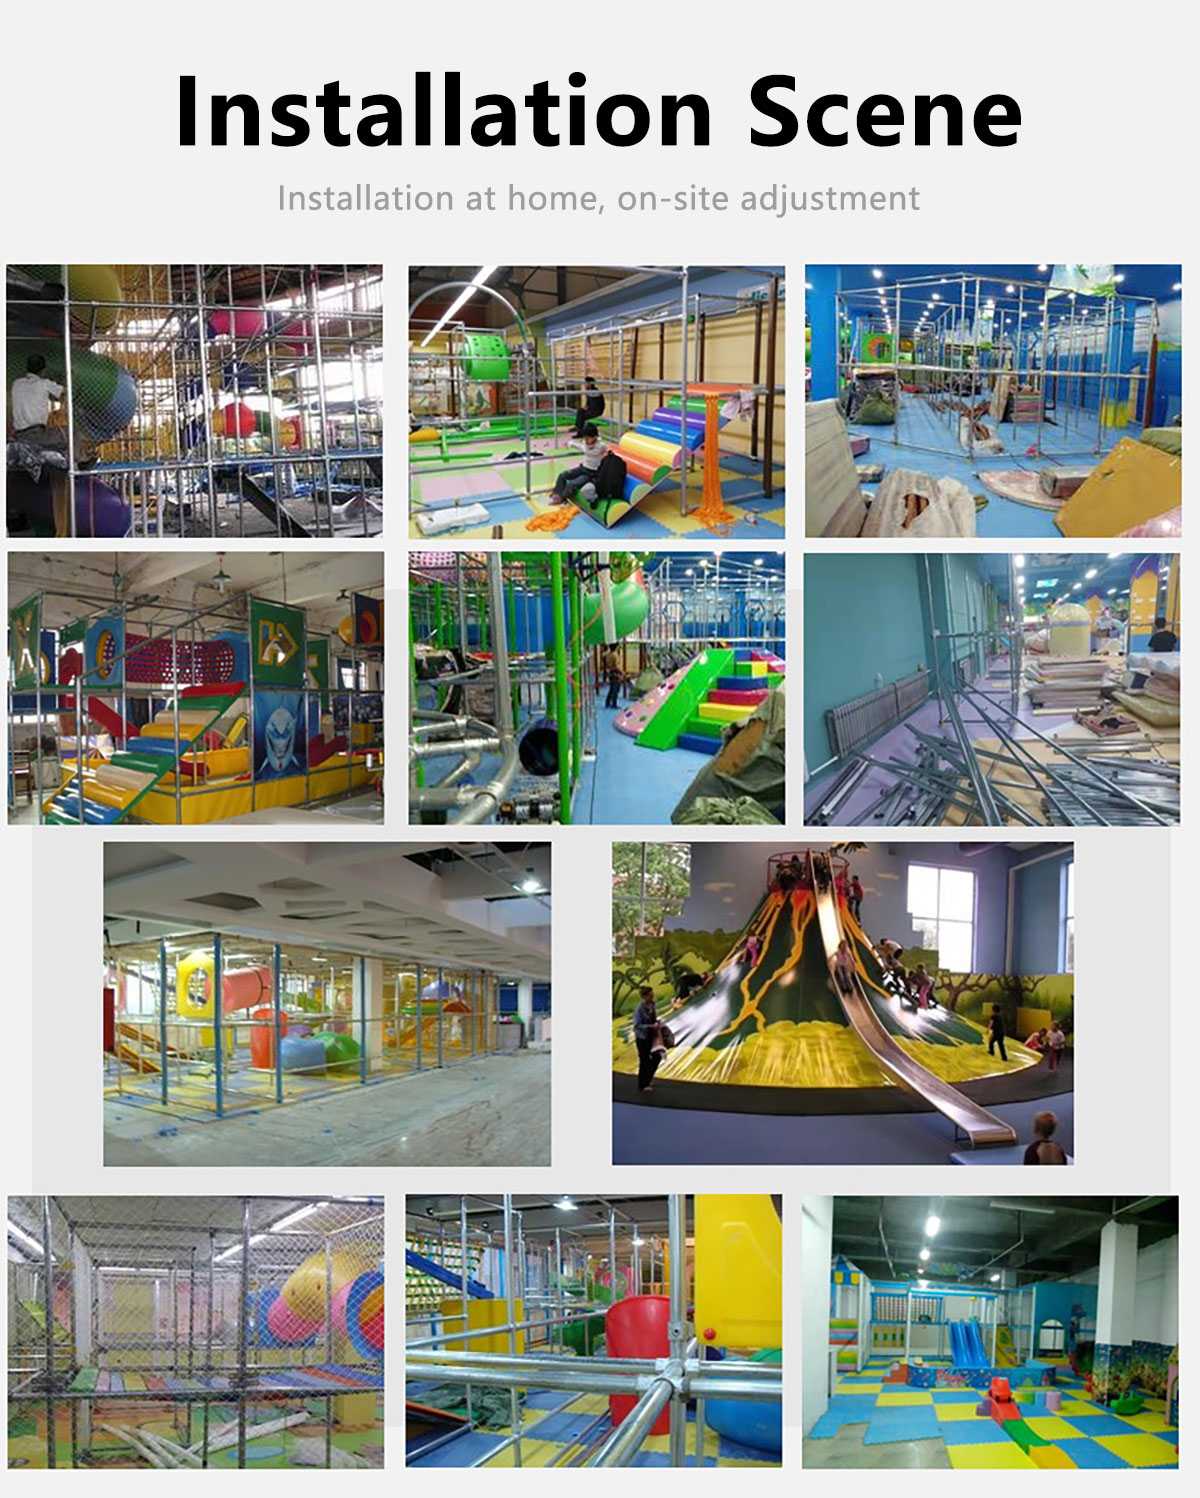 indoor playground equipment space theme picture (4)